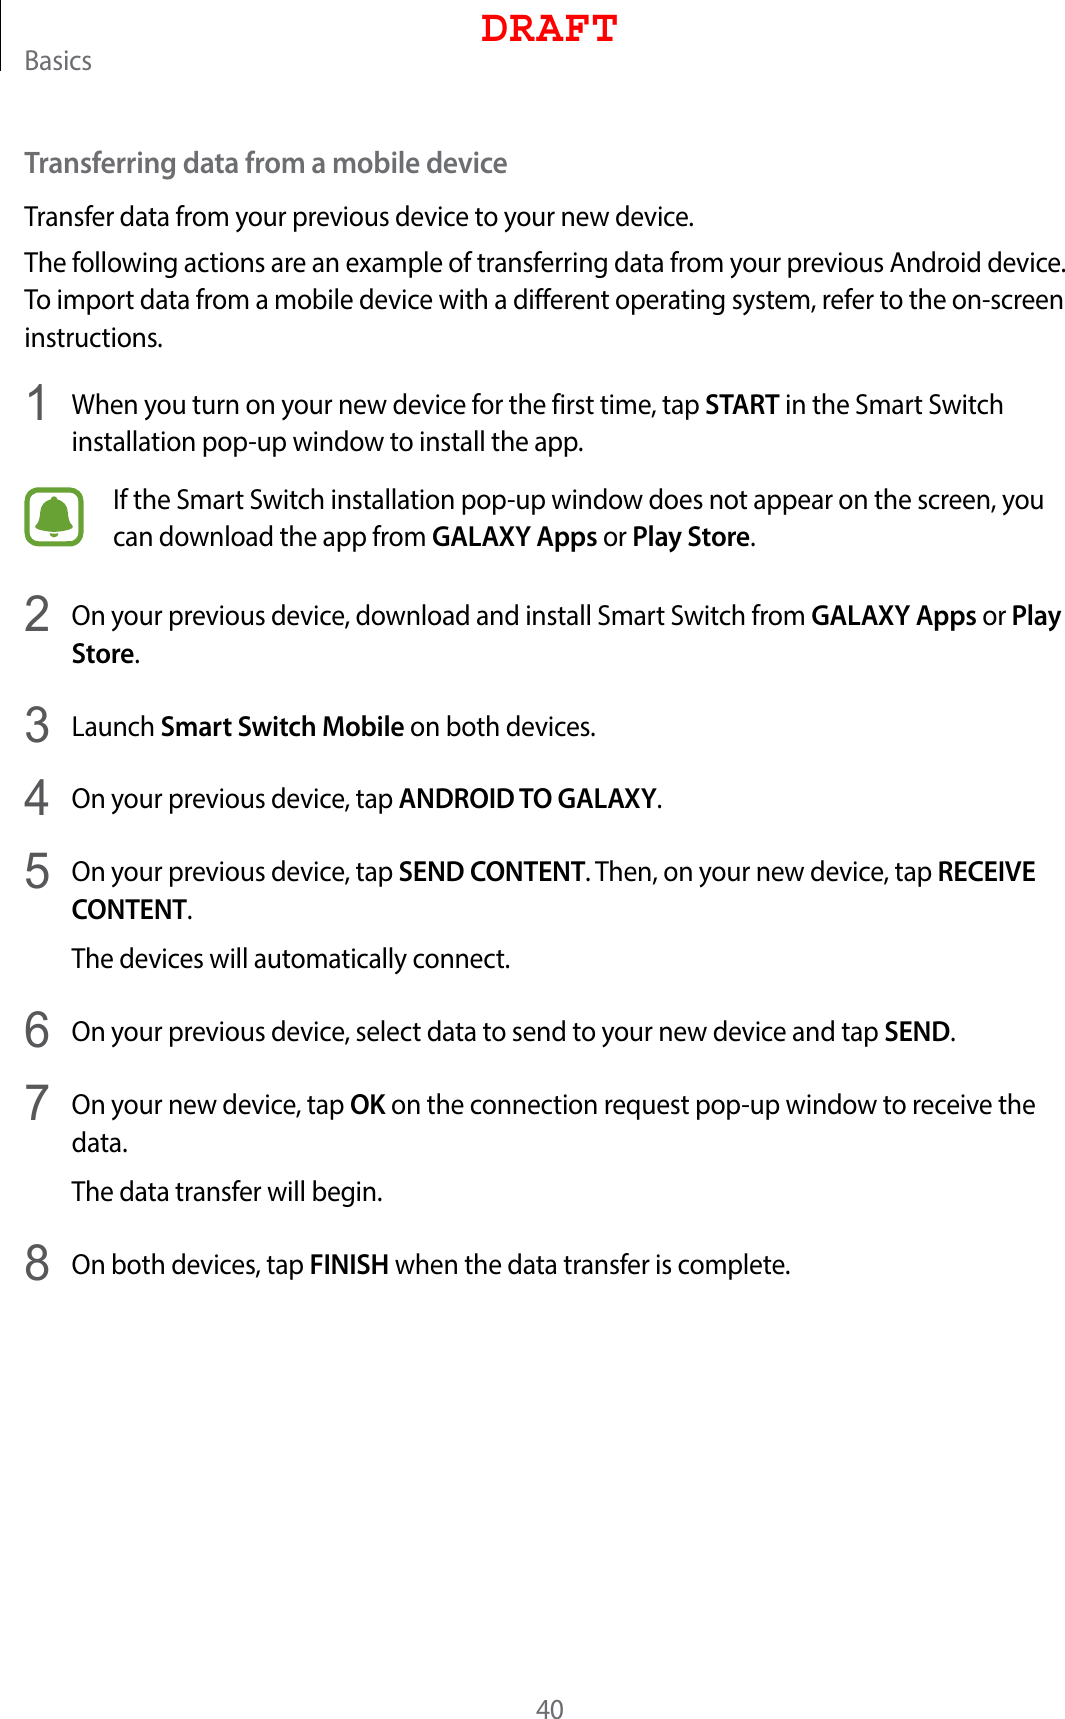 Basics40Transferring data from a mobile deviceTransfer data from your previous device to your new device.The following actions are an example of transferring data from your previous Android device. To import data from a mobile device with a different operating system, refer to the on-screen instructions.1  When you turn on your new device for the first time, tap START in the Smart Switch installation pop-up window to install the app.If the Smart Switch installation pop-up window does not appear on the screen, you can download the app from GALAXY Apps or Play Store.2  On your previous device, download and install Smart Switch from GALAXY Apps or Play Store.3  Launch Smart Switch Mobile on both devices.4  On your previous device, tap ANDROID TO GALAXY.5  On your previous device, tap SEND CONTENT. Then, on your new device, tap RECEIVE CONTENT.The devices will automatically connect.6  On your previous device, select data to send to your new device and tap SEND.7  On your new device, tap OK on the connection request pop-up window to receive the data.The data transfer will begin.8  On both devices, tap FINISH when the data transfer is complete.DRAFT